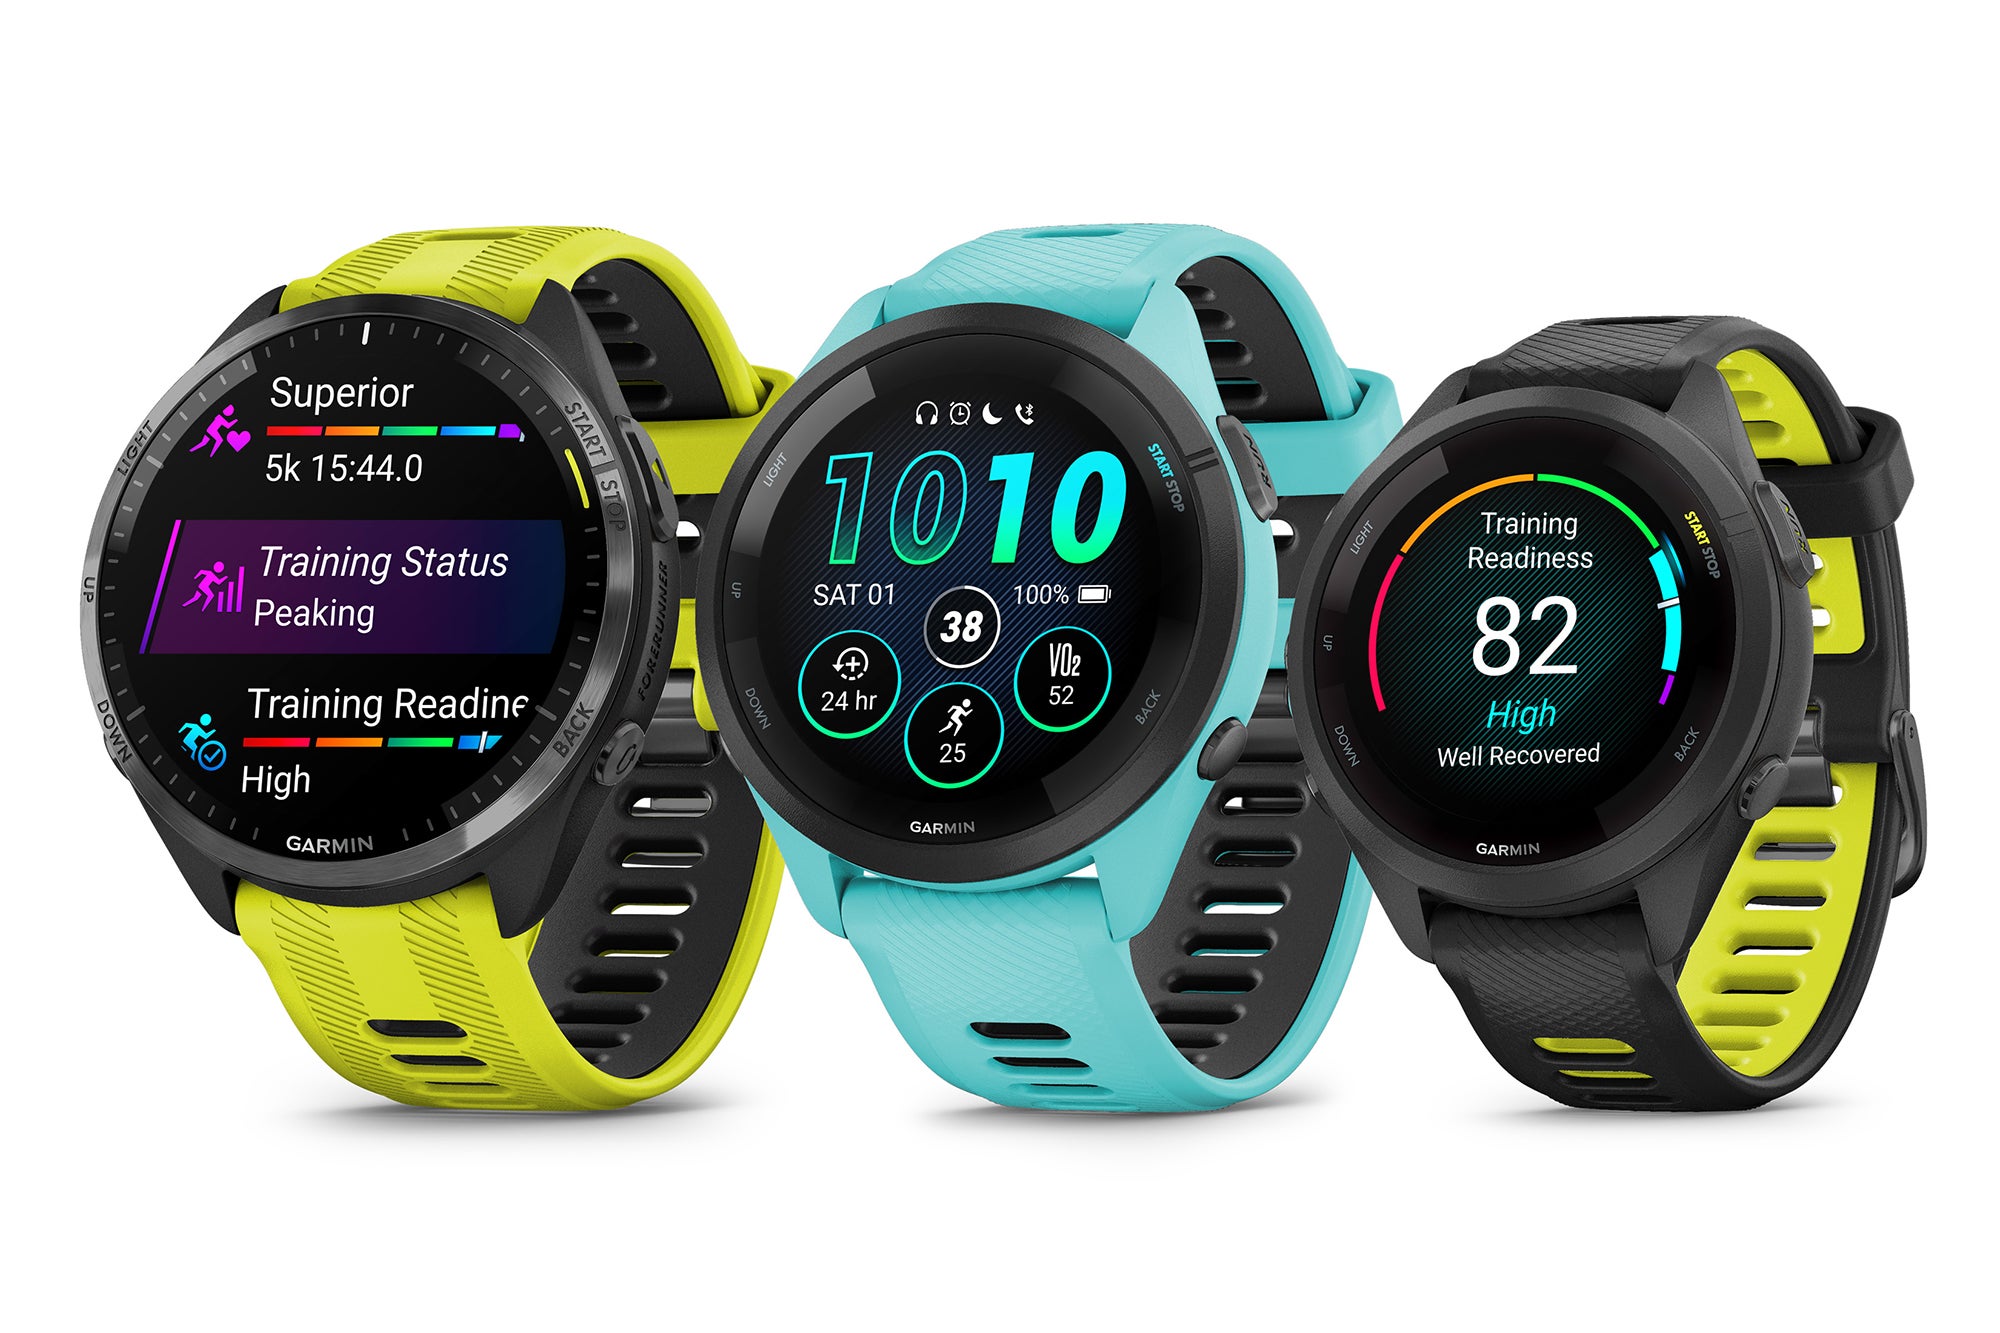 regnskyl roman indre Garmin's latest running watches pair vivid visuals with your vitals |  Popular Science